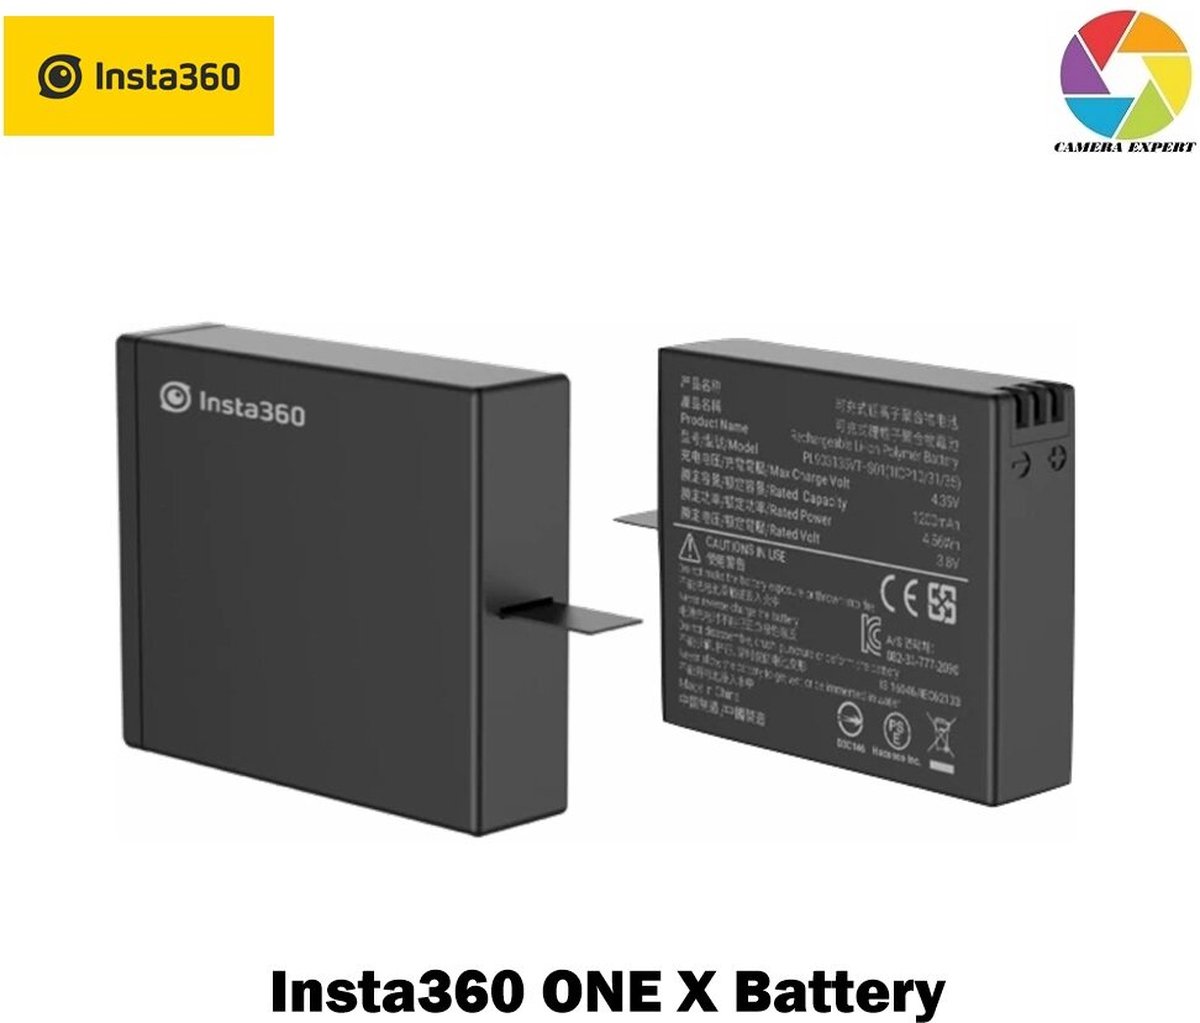 Insta360 ONE X battery